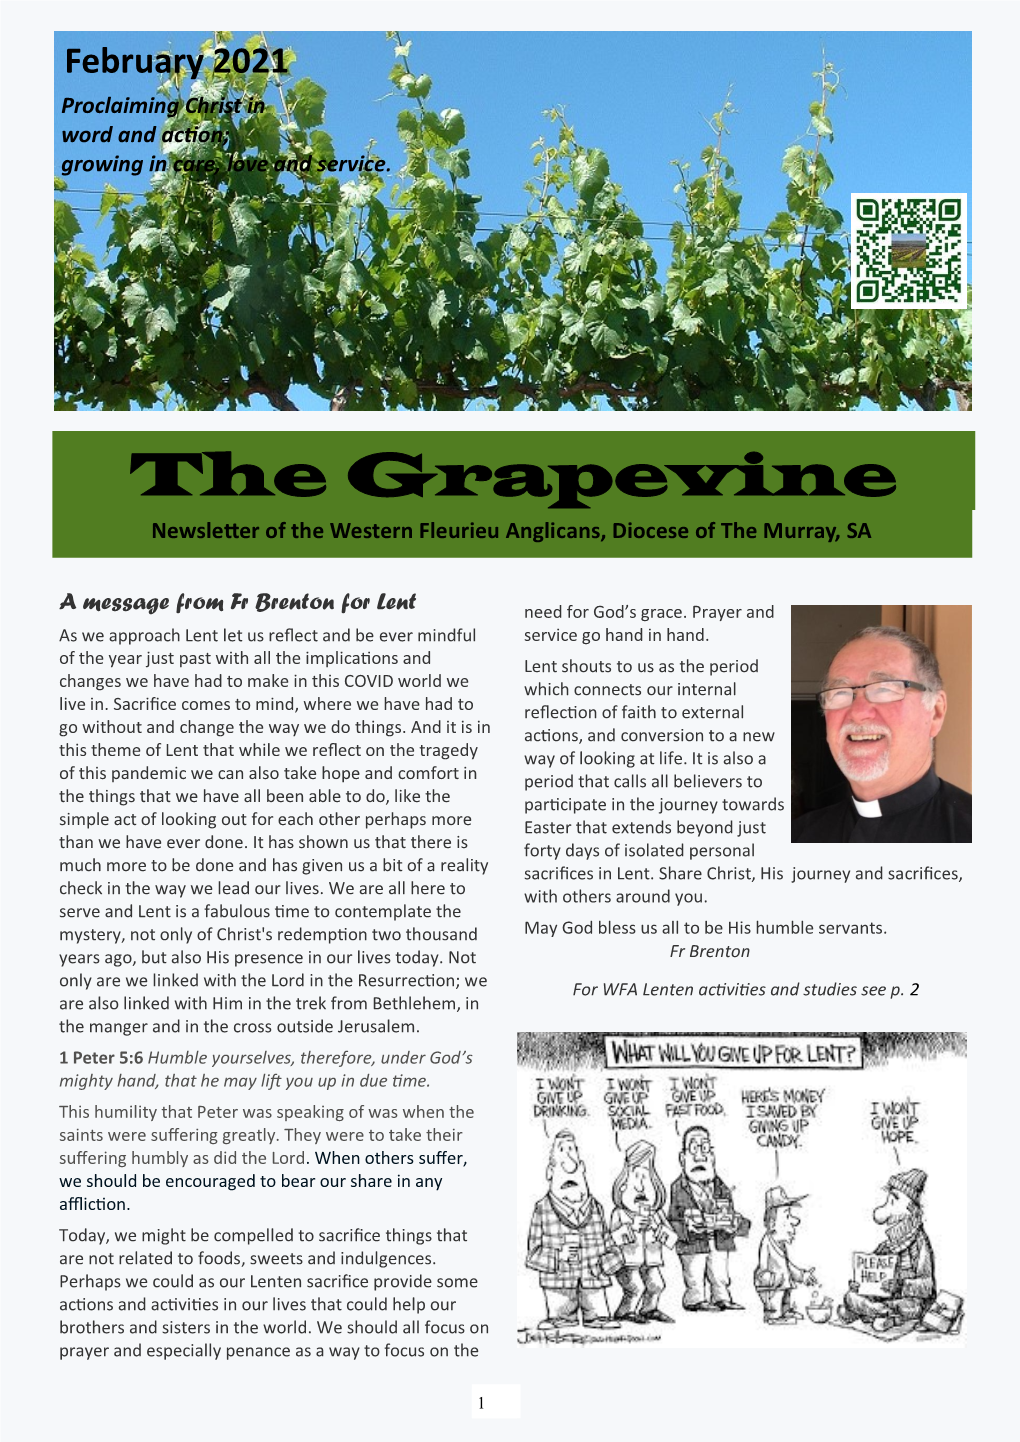 The Grapevine Newsletter of the Western Fleurieu Anglicans, Diocese of the Murray, SA